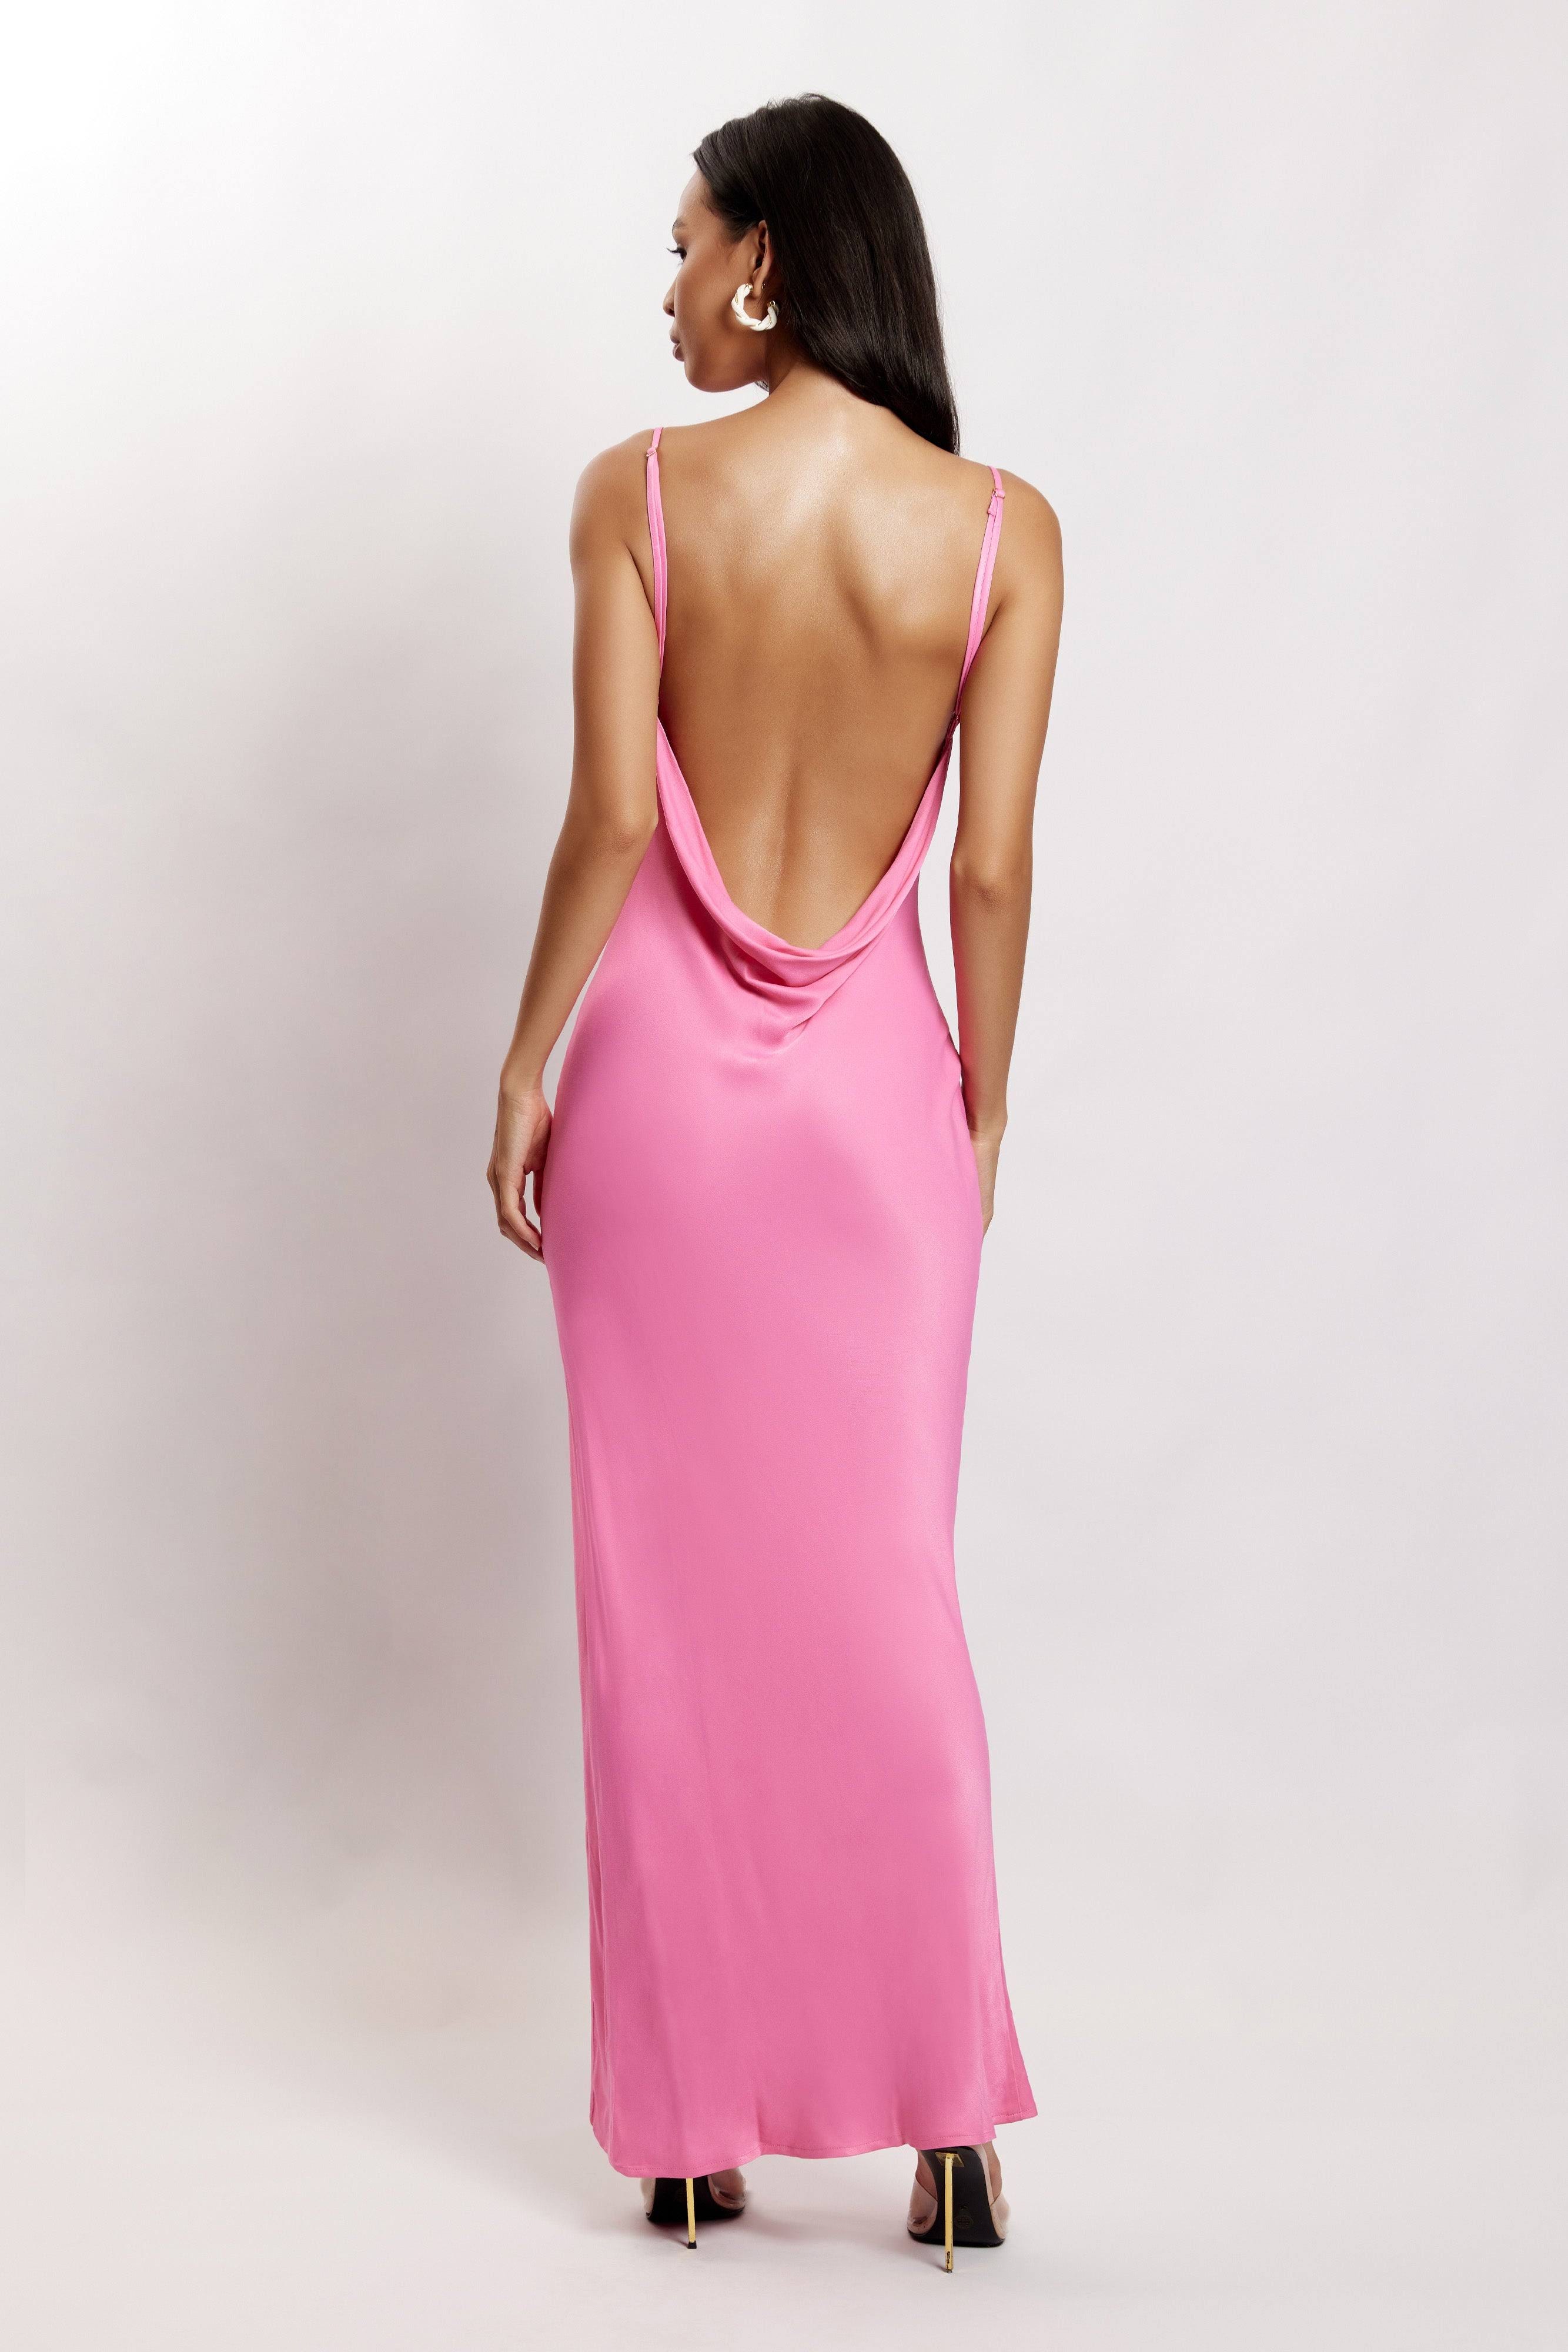 Elegant Solid Maxi Dress for Special Occasions | Image